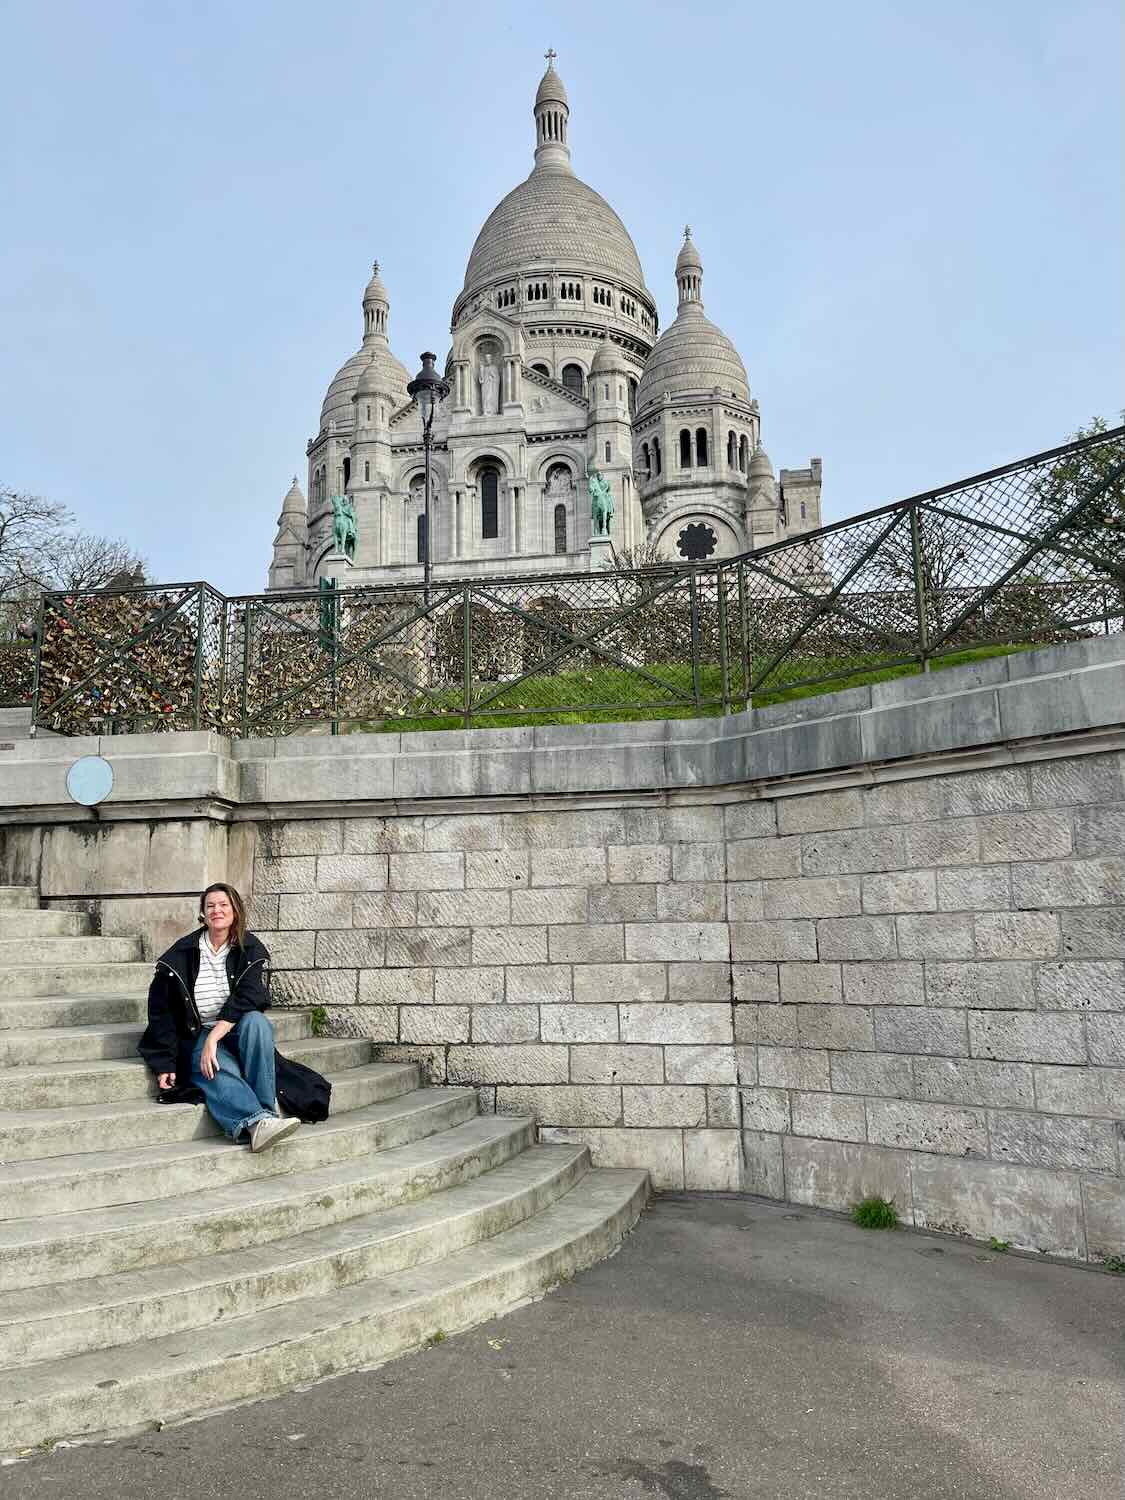 A solo female traveler sits on the steps in front of the majestic Sacré-Cœur Basilica in Paris. The intricate white architecture of the basilica rises impressively behind her, under a clear sky.